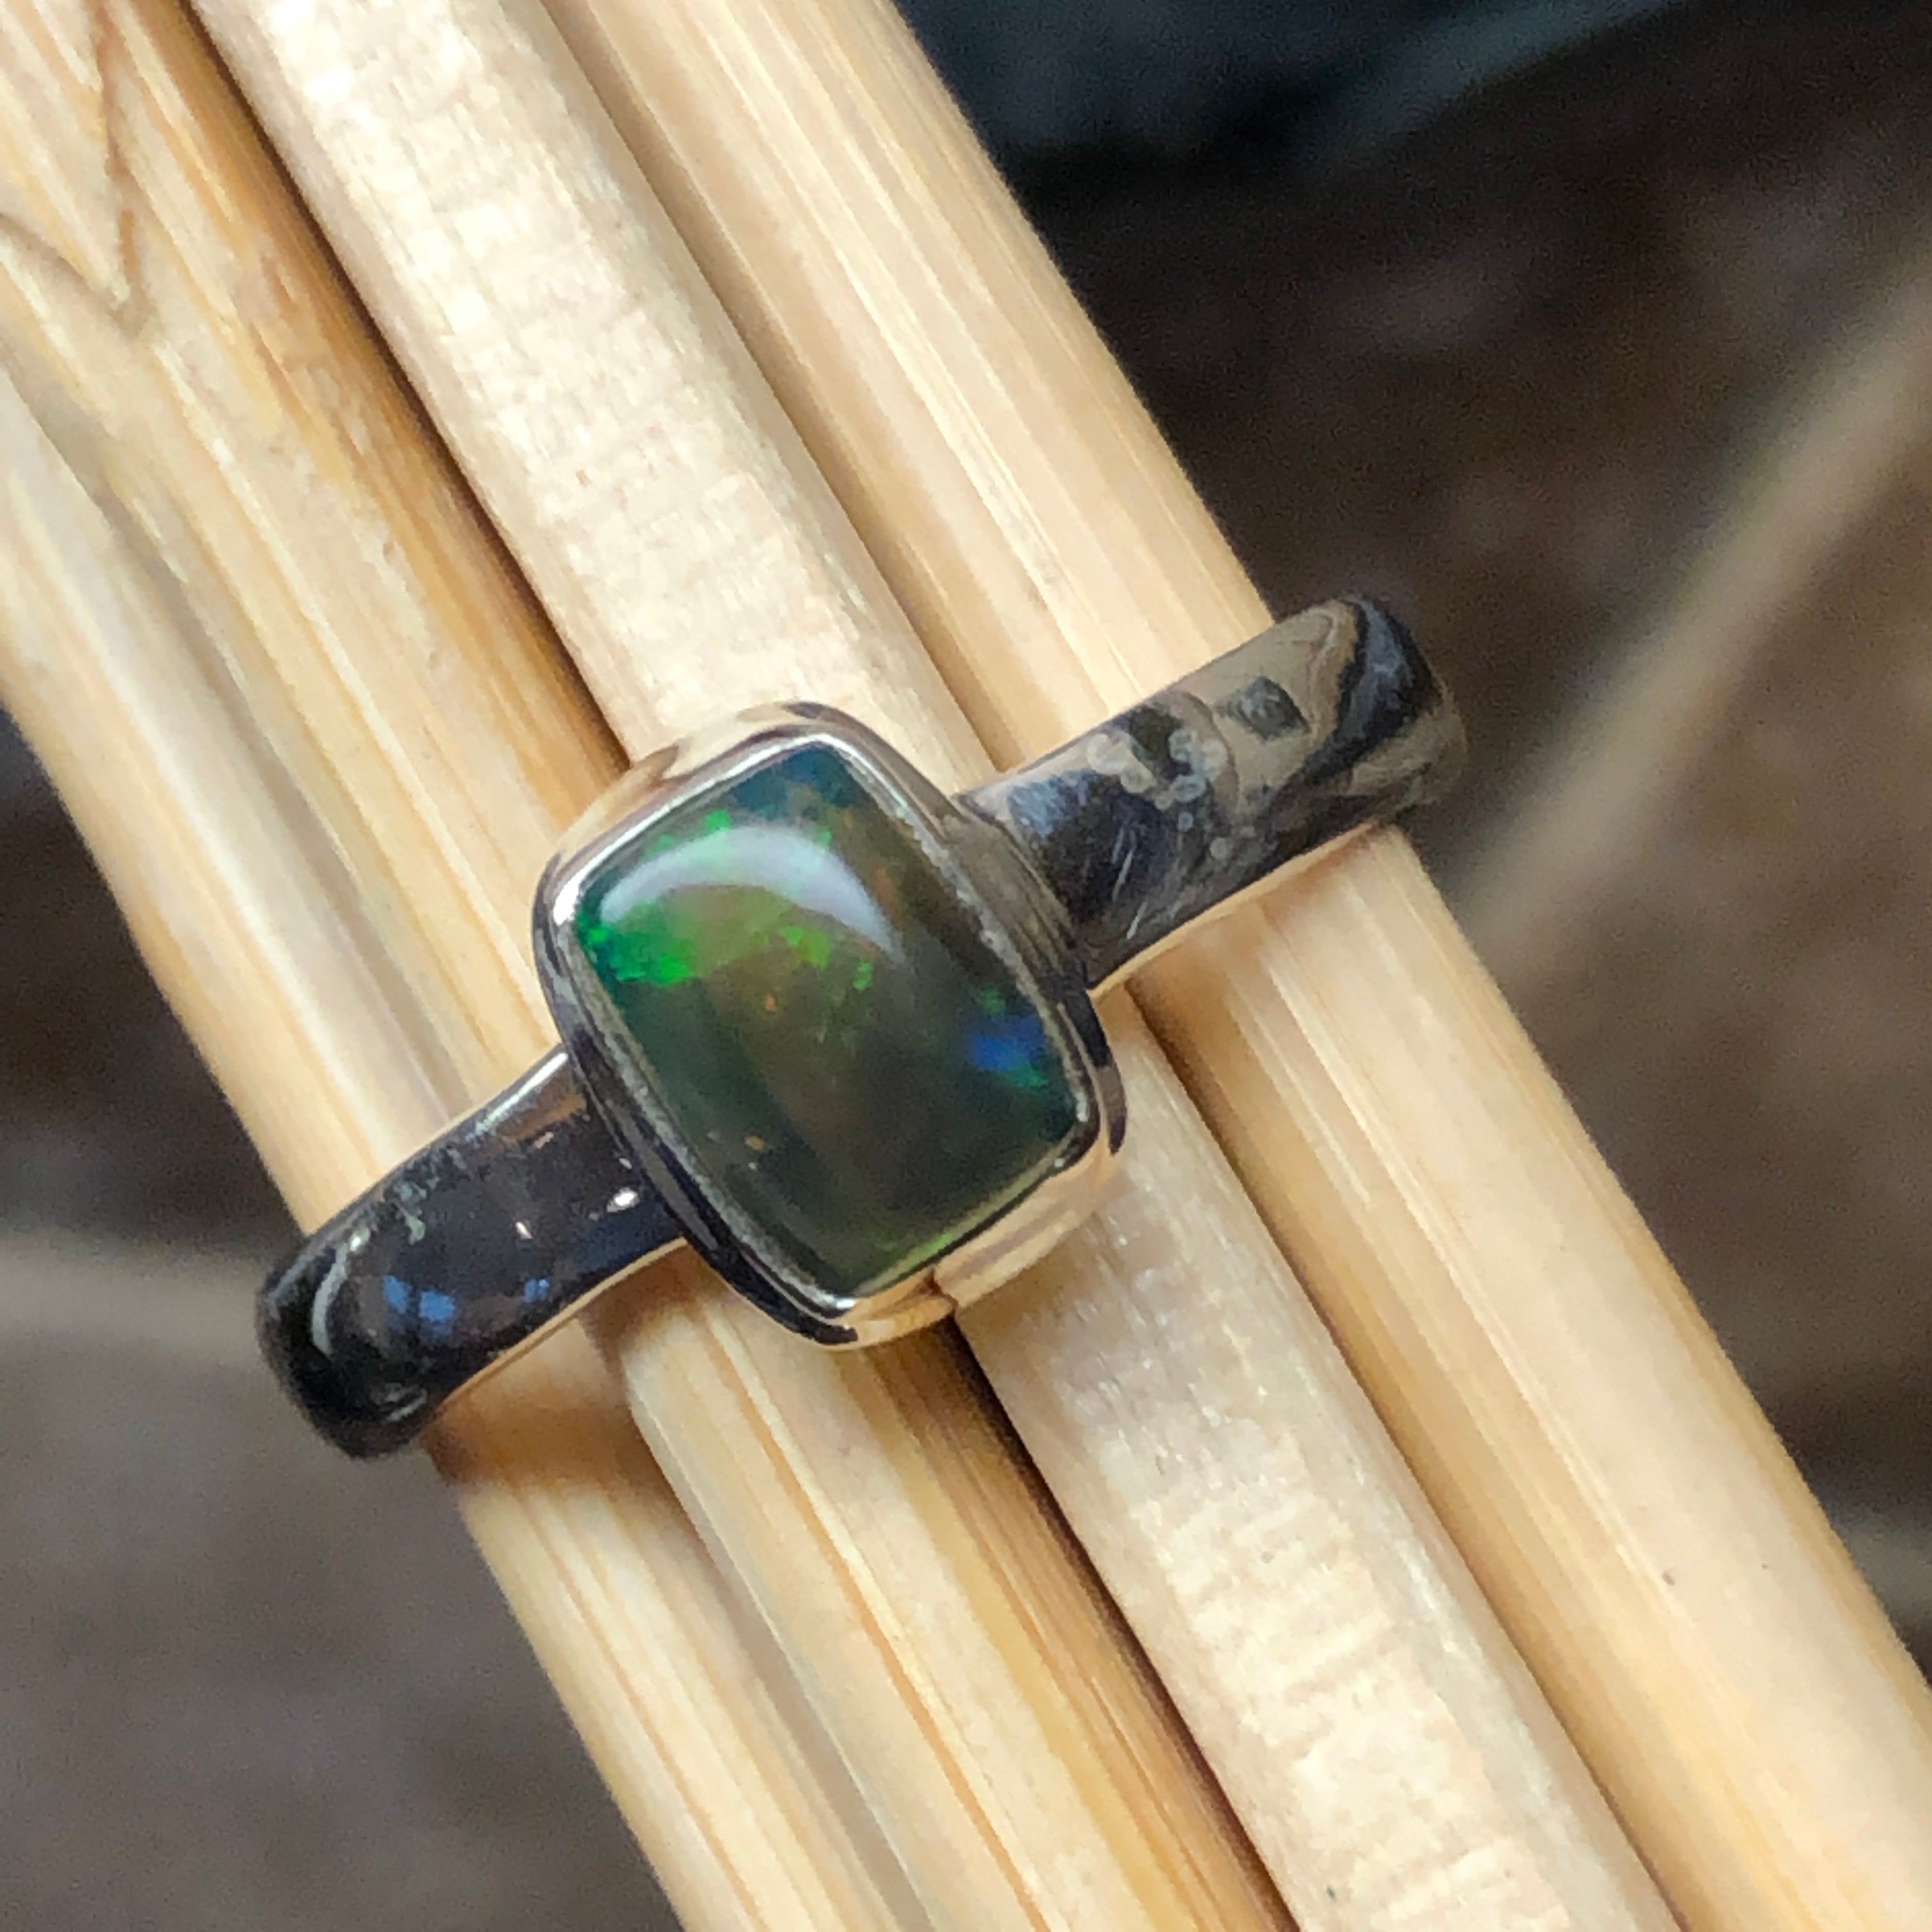 Genuine Chalama Black Opal 925 Solid Sterling Silver Ring Size 8 - Natural Rocks by Kala